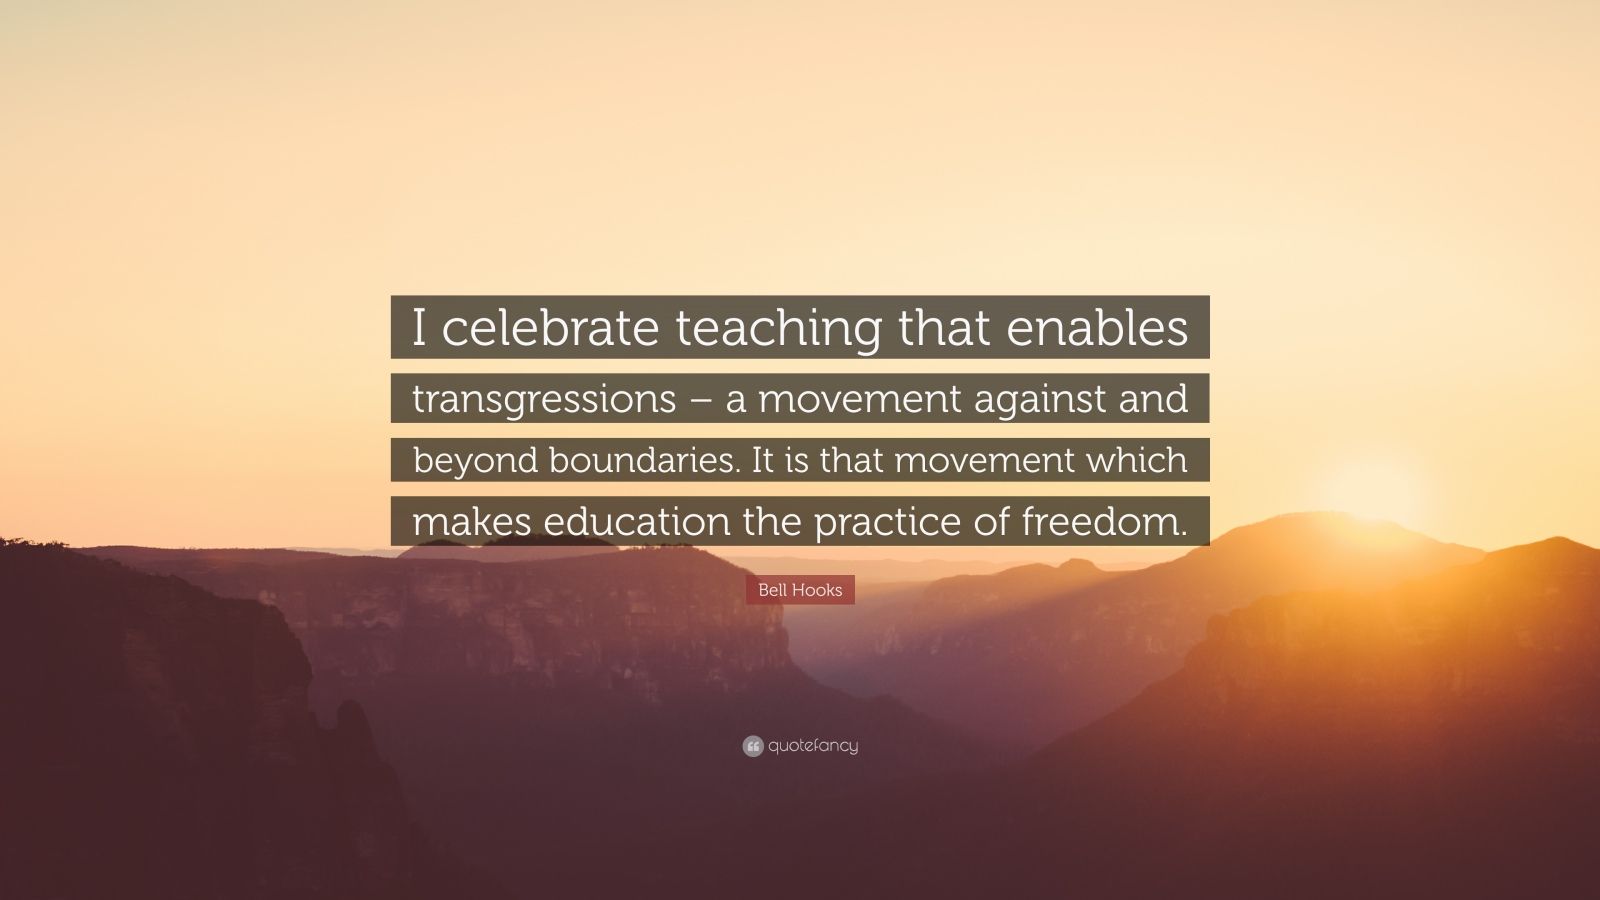 bell hooks education as the practice of freedom